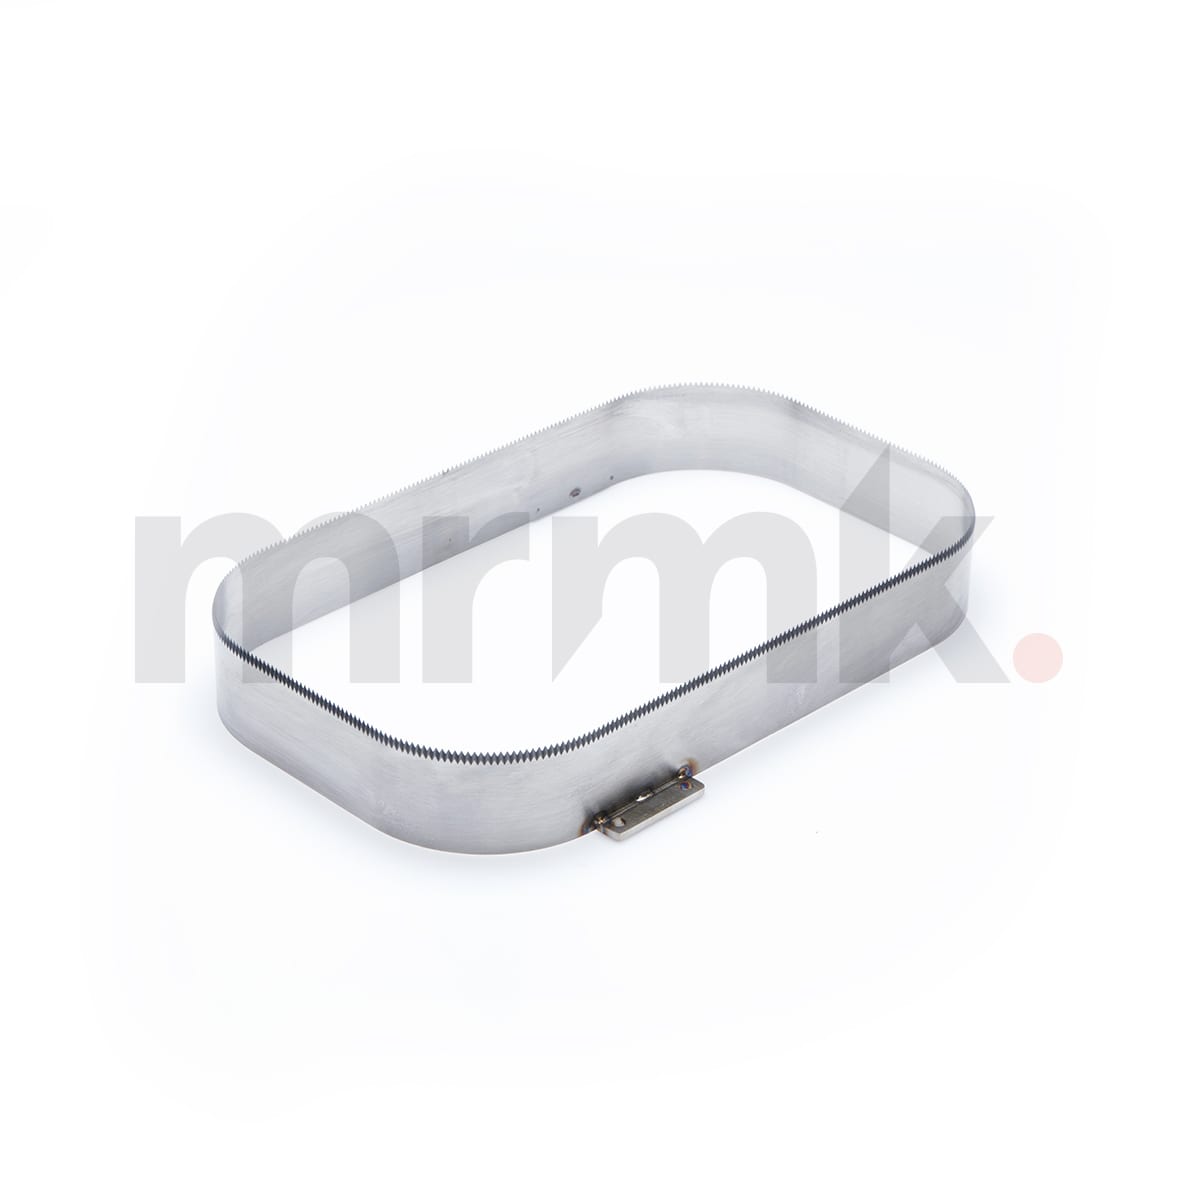 Reepack Compatible Tray Seal Knife 2